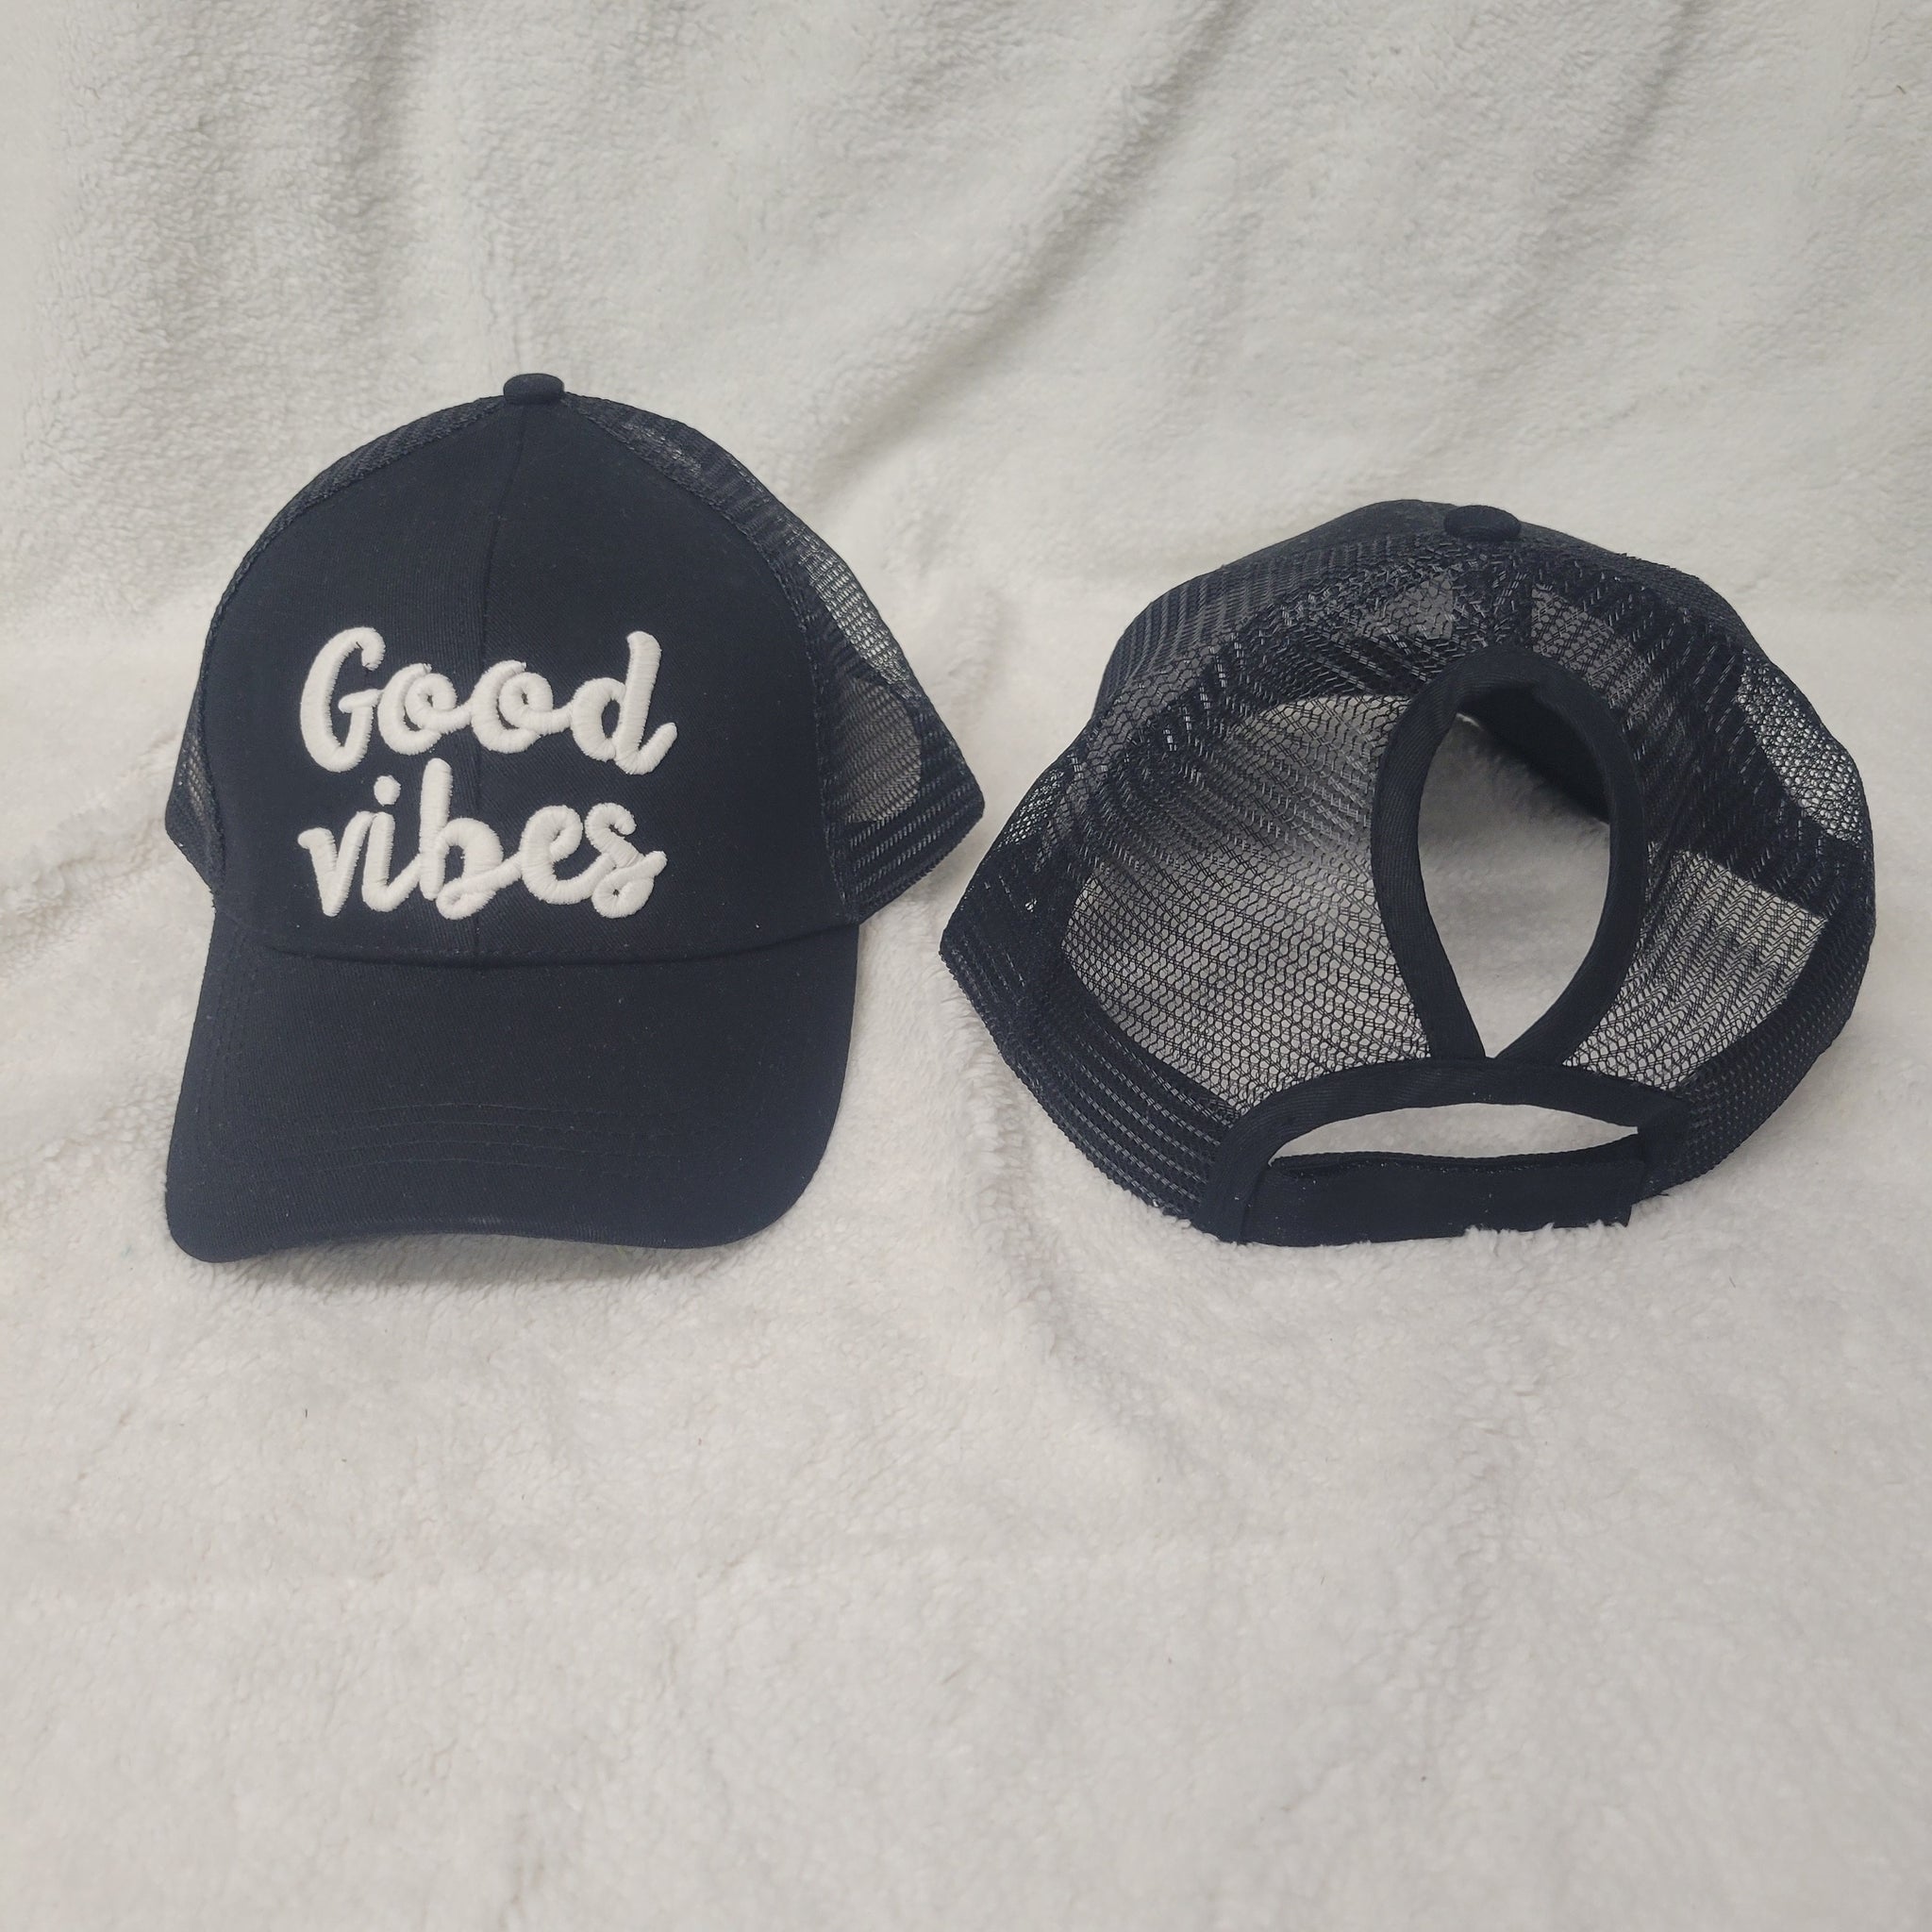 Good Vibes color changing Ponytail Hat - Gals and Dogs Boutique Limited